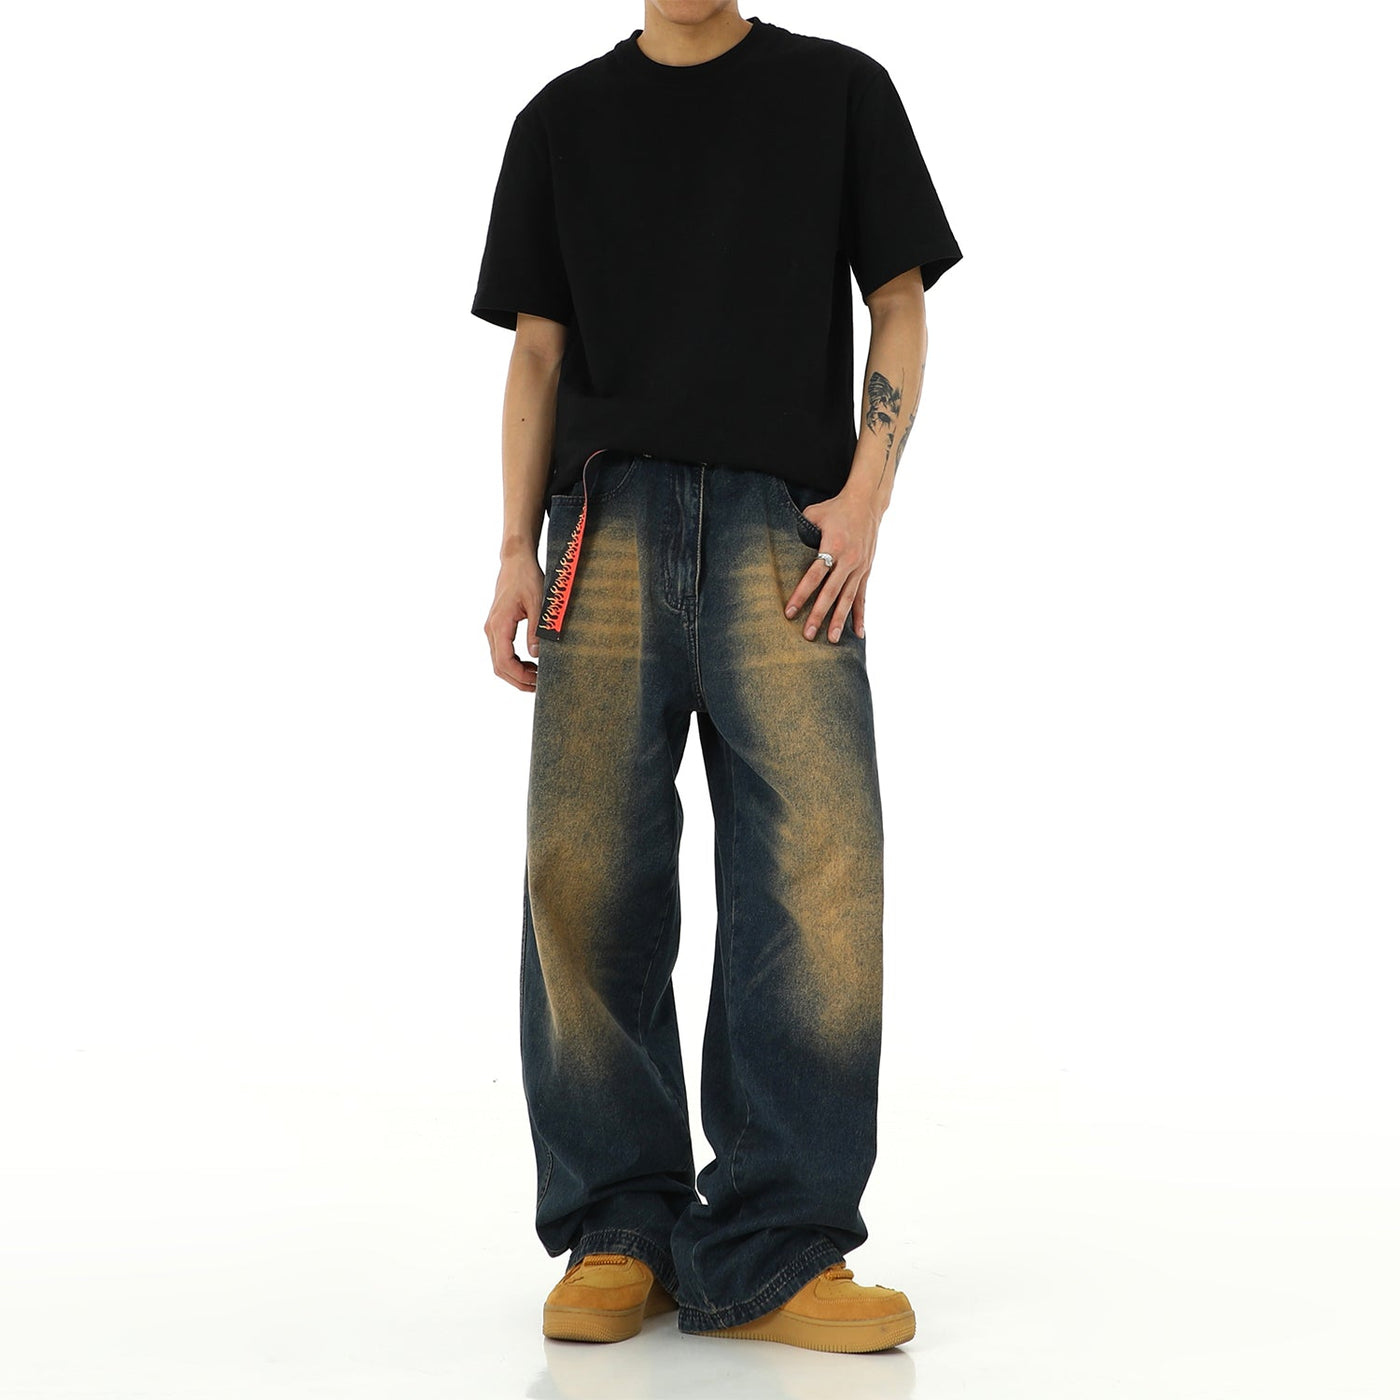 MEBXX Vintage Washed Straight Leg Jeans Korean Street Fashion Jeans By Made Extreme Shop Online at OH Vault